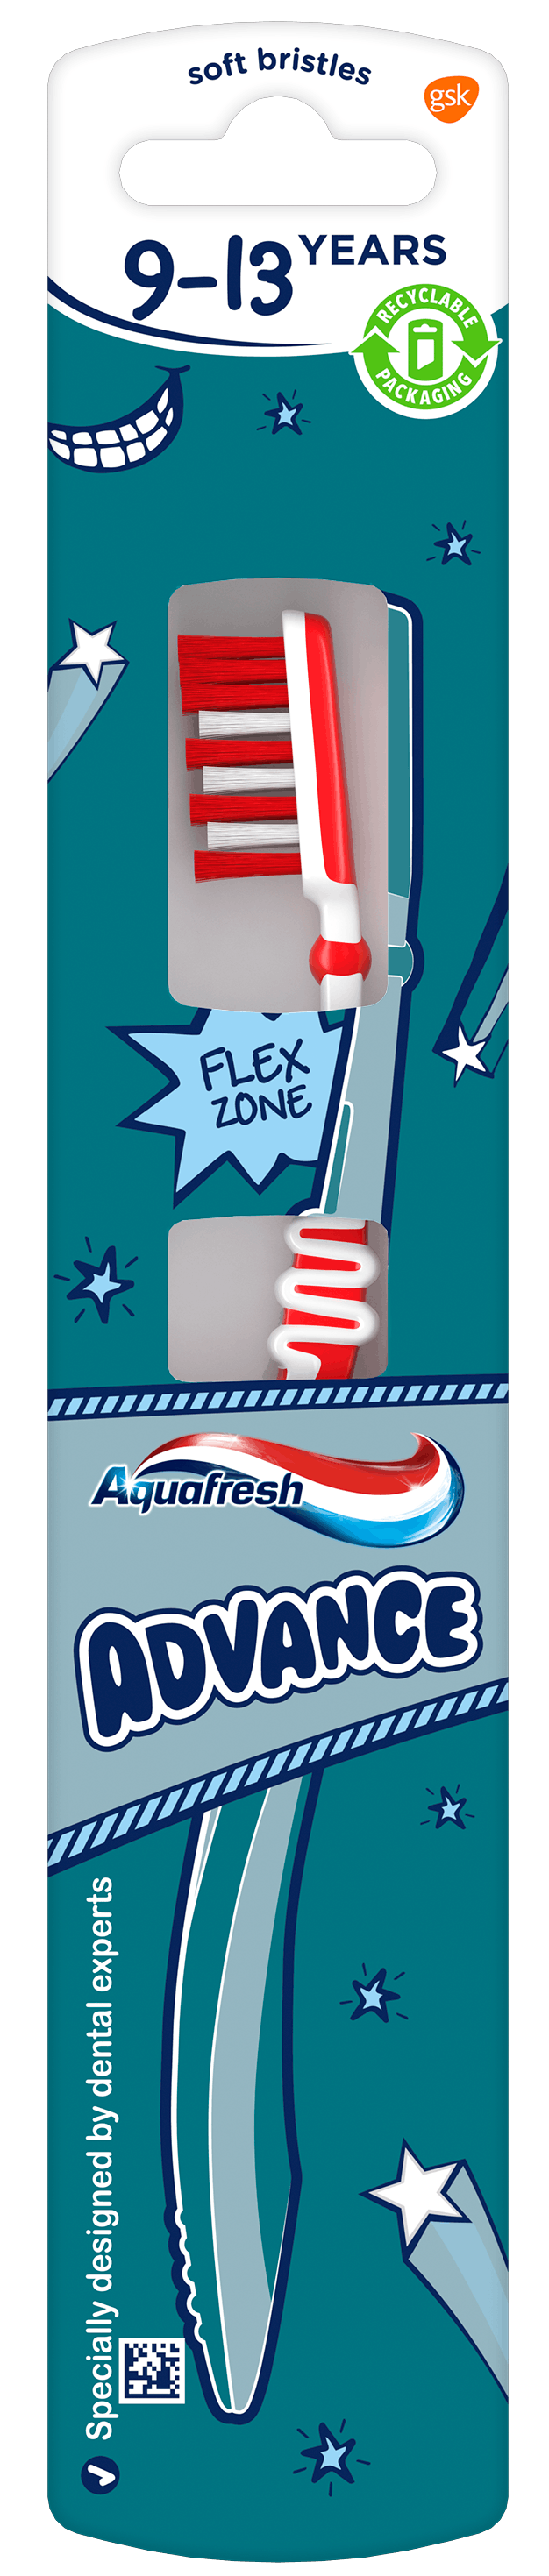 Aquafresh Advance Teeth toothbrush in mint green/white design and a playful blue packaging.